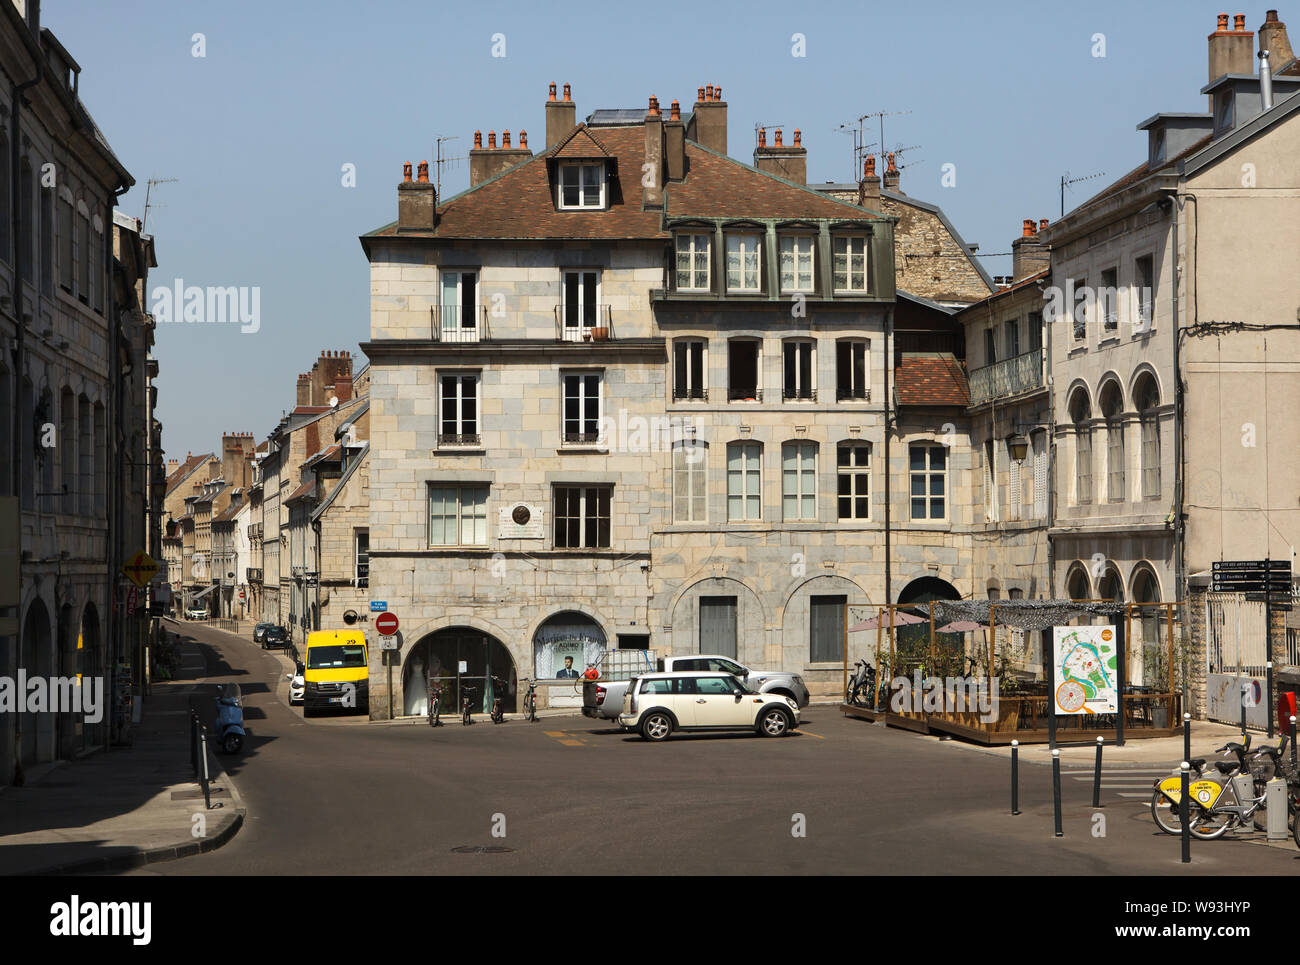 Birthplace of the Lumière Brothers in Besançon, France. The inventors of the moving picture Auguste and Louis Lumière were born in this house on the corner of Grande Rue and Place Victor Hugo. Stock Photo